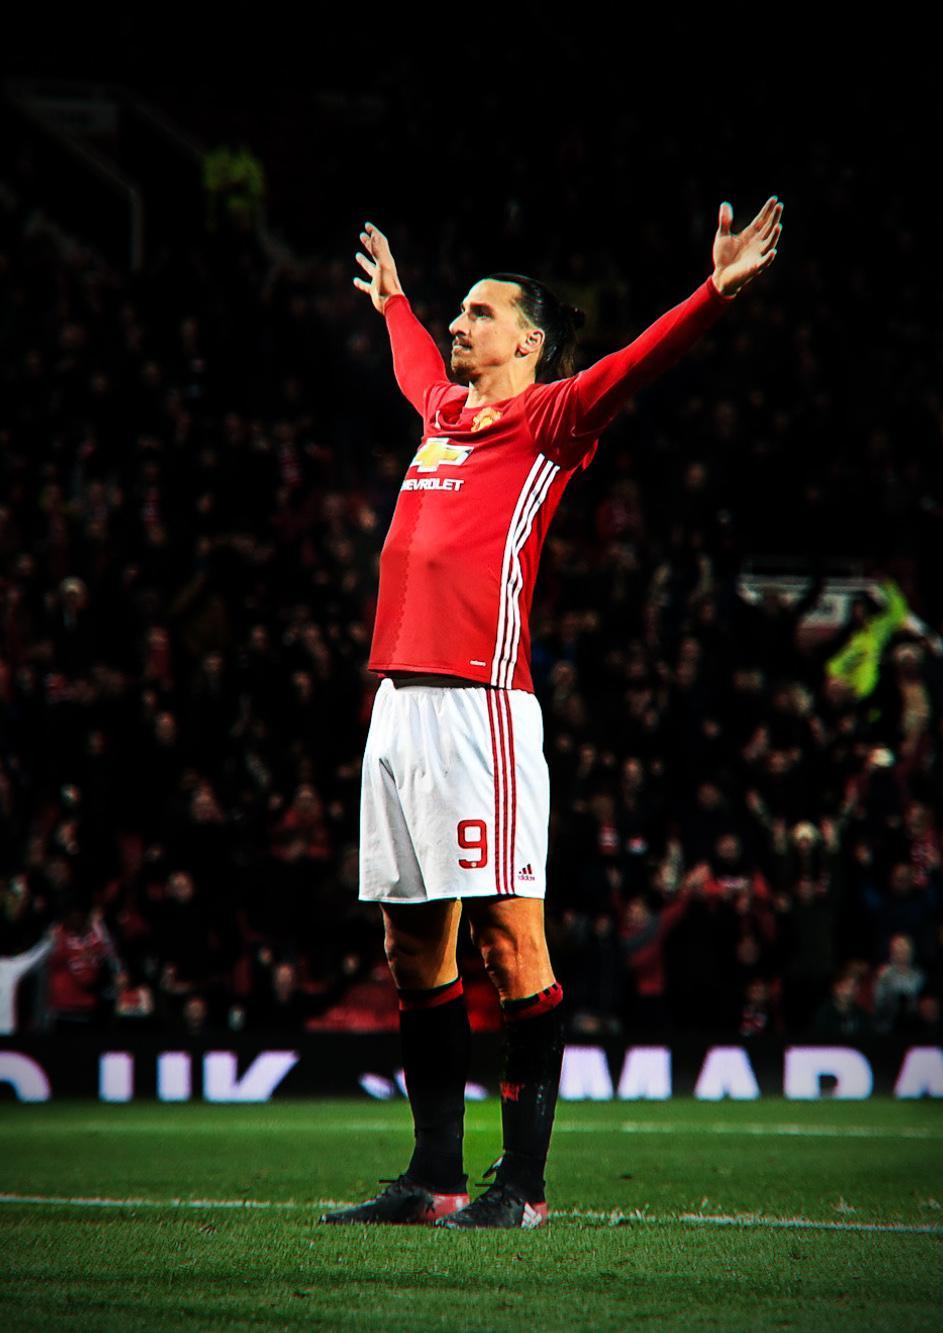 Ibra phone wallpaper for you all